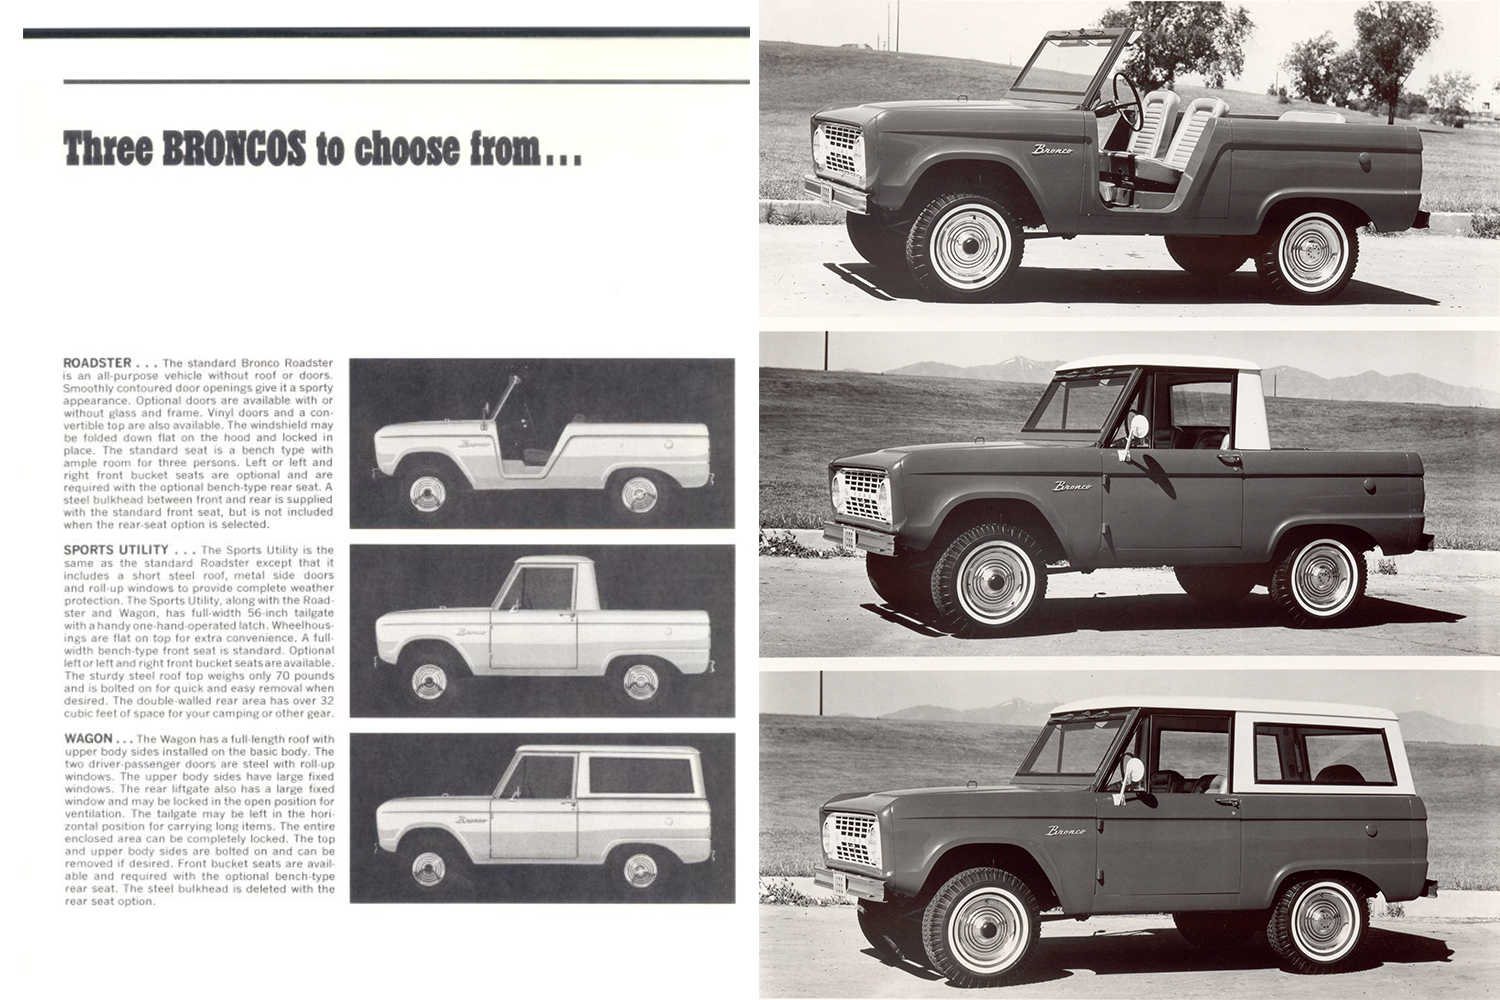 1966 first generation Ford Bronco ads and marketing materials